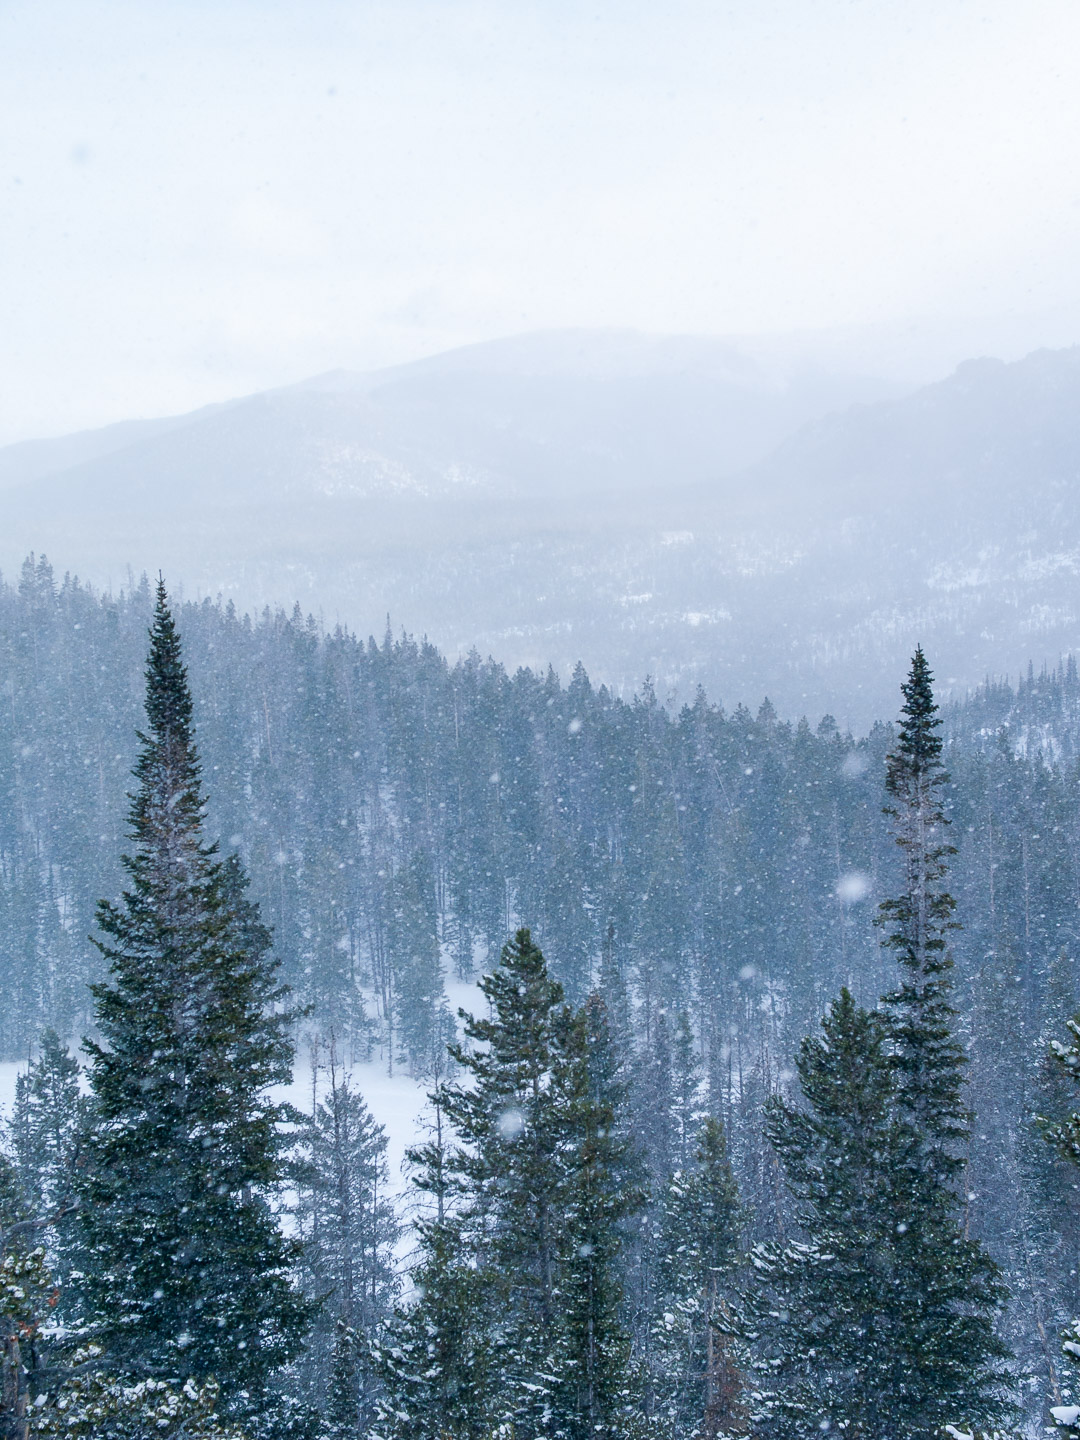 Snow falls over trees and distant mountains